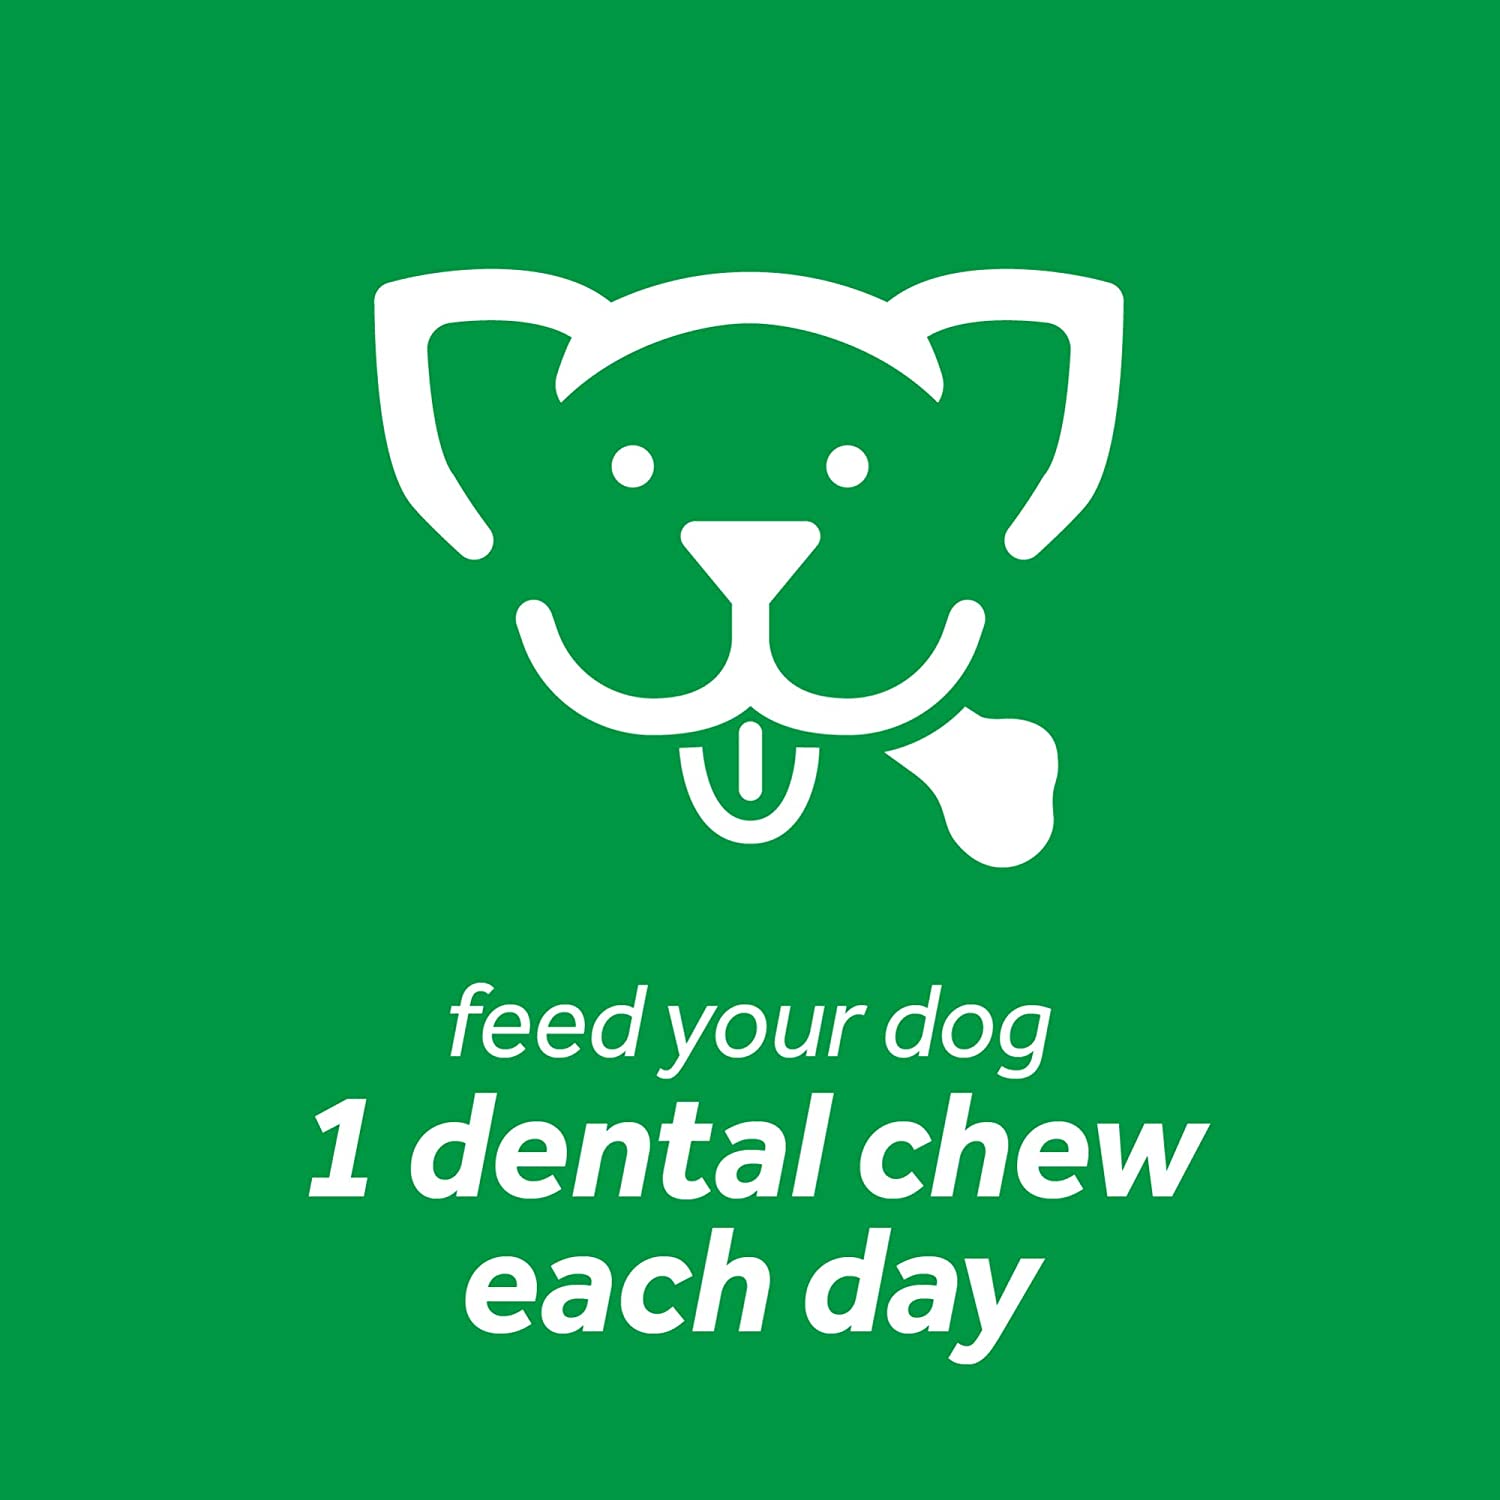 Fresh Breath by TropiClean Dental Chews for Dogs, Made in USA - Removes Plaque & Tartar